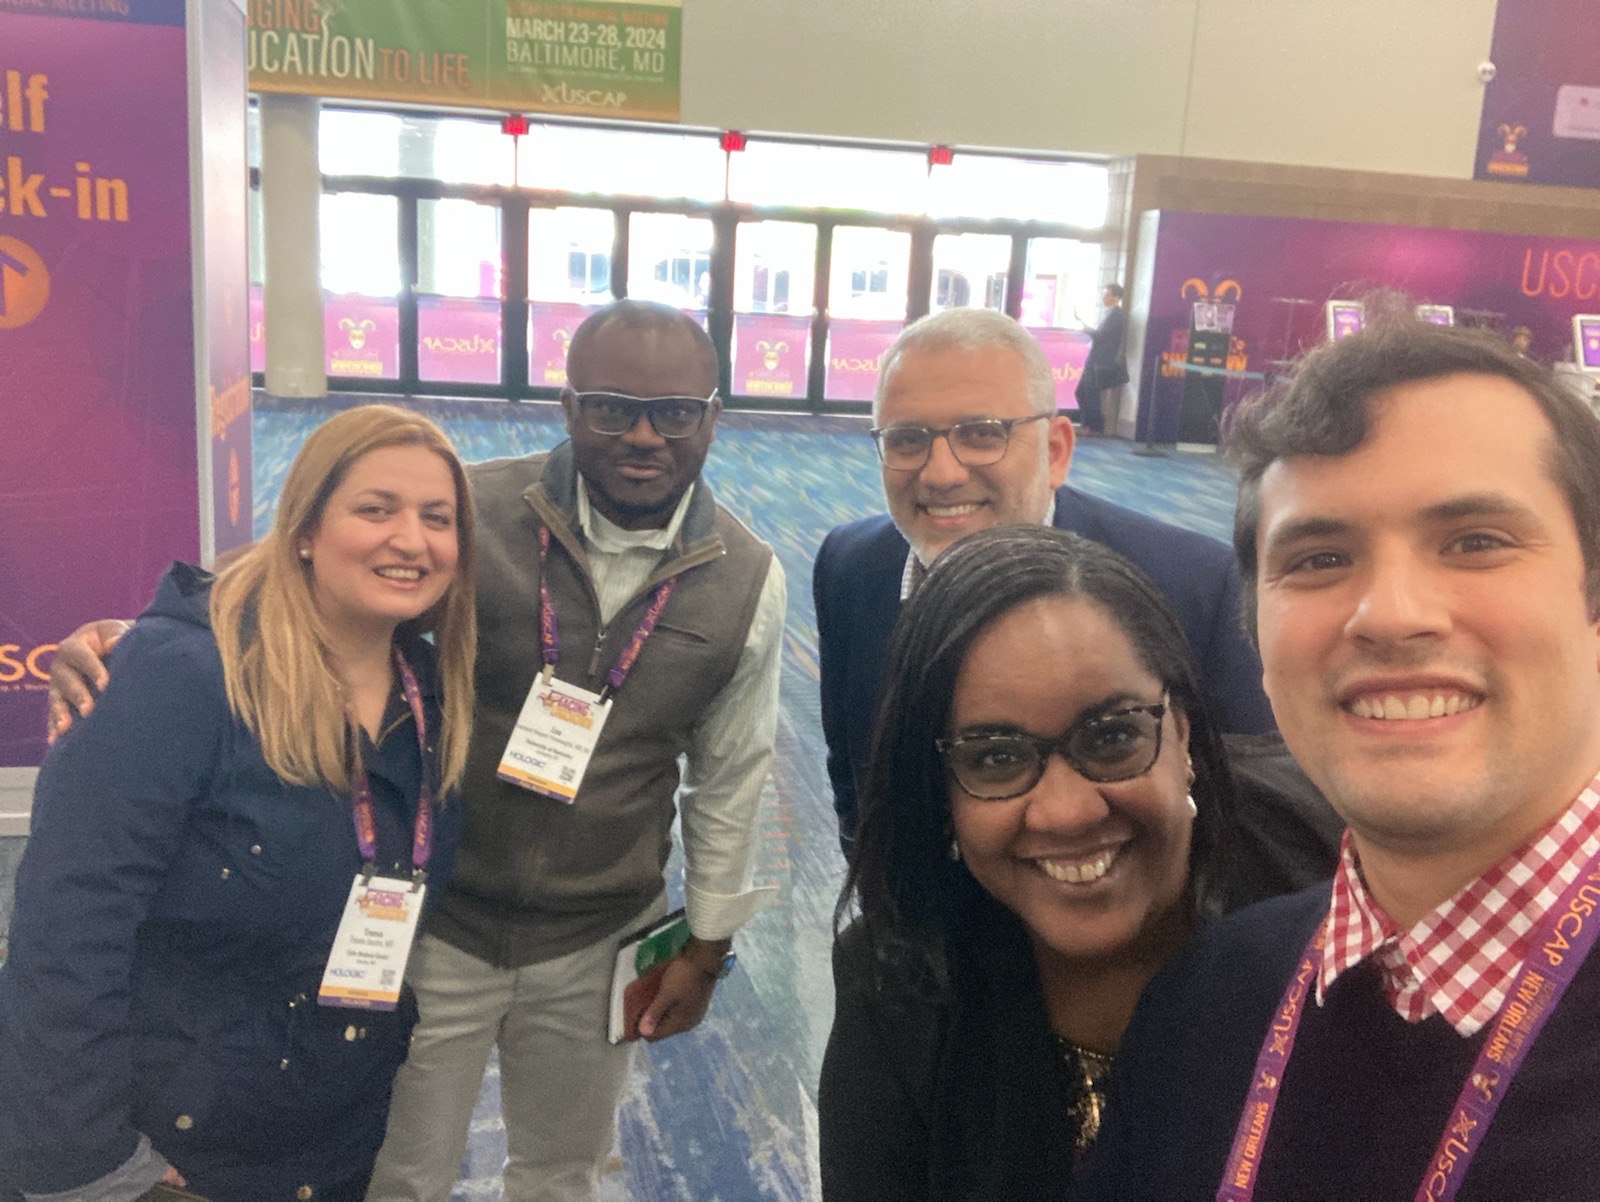 Residents and former faculty at USCAP.